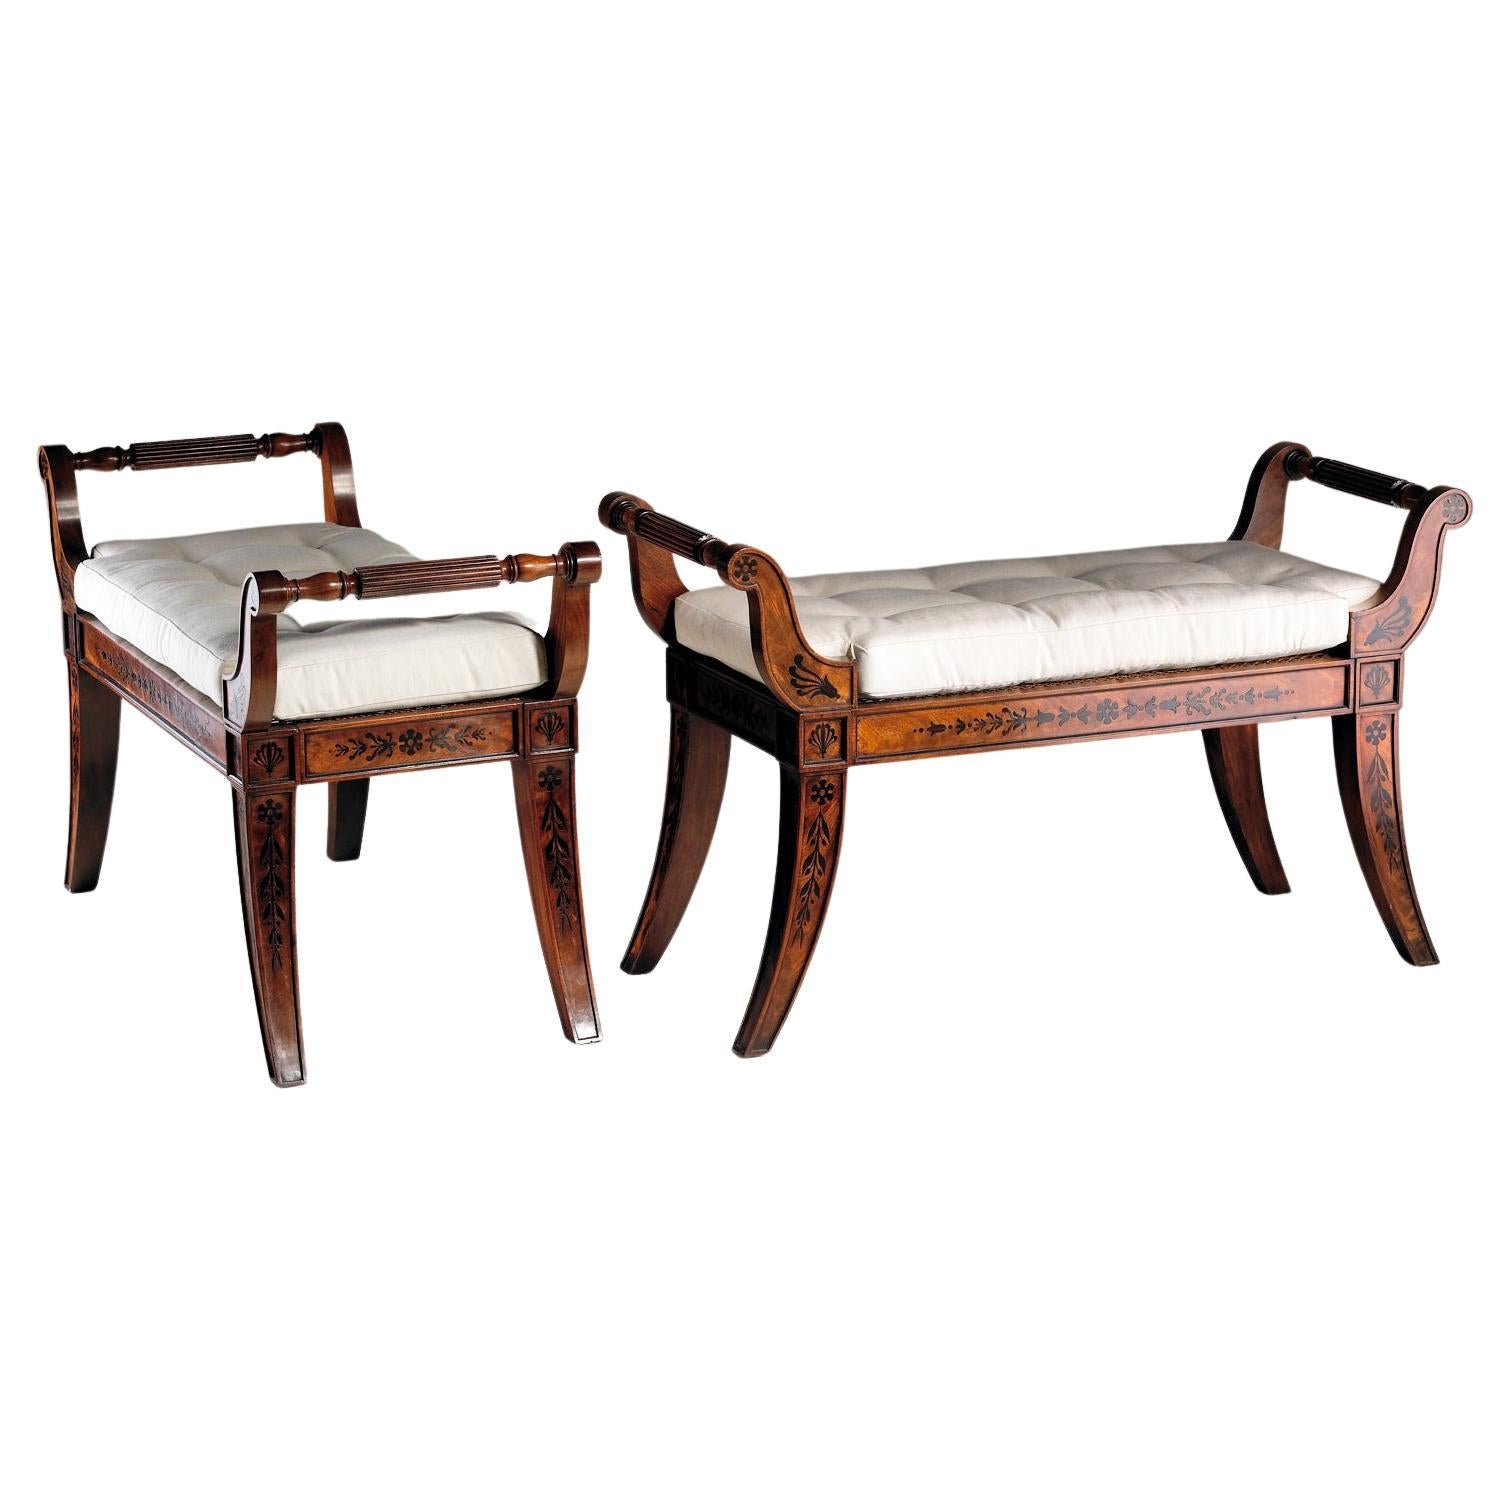 Pair of Regency Window Seats Attributed to George Bullock For Sale